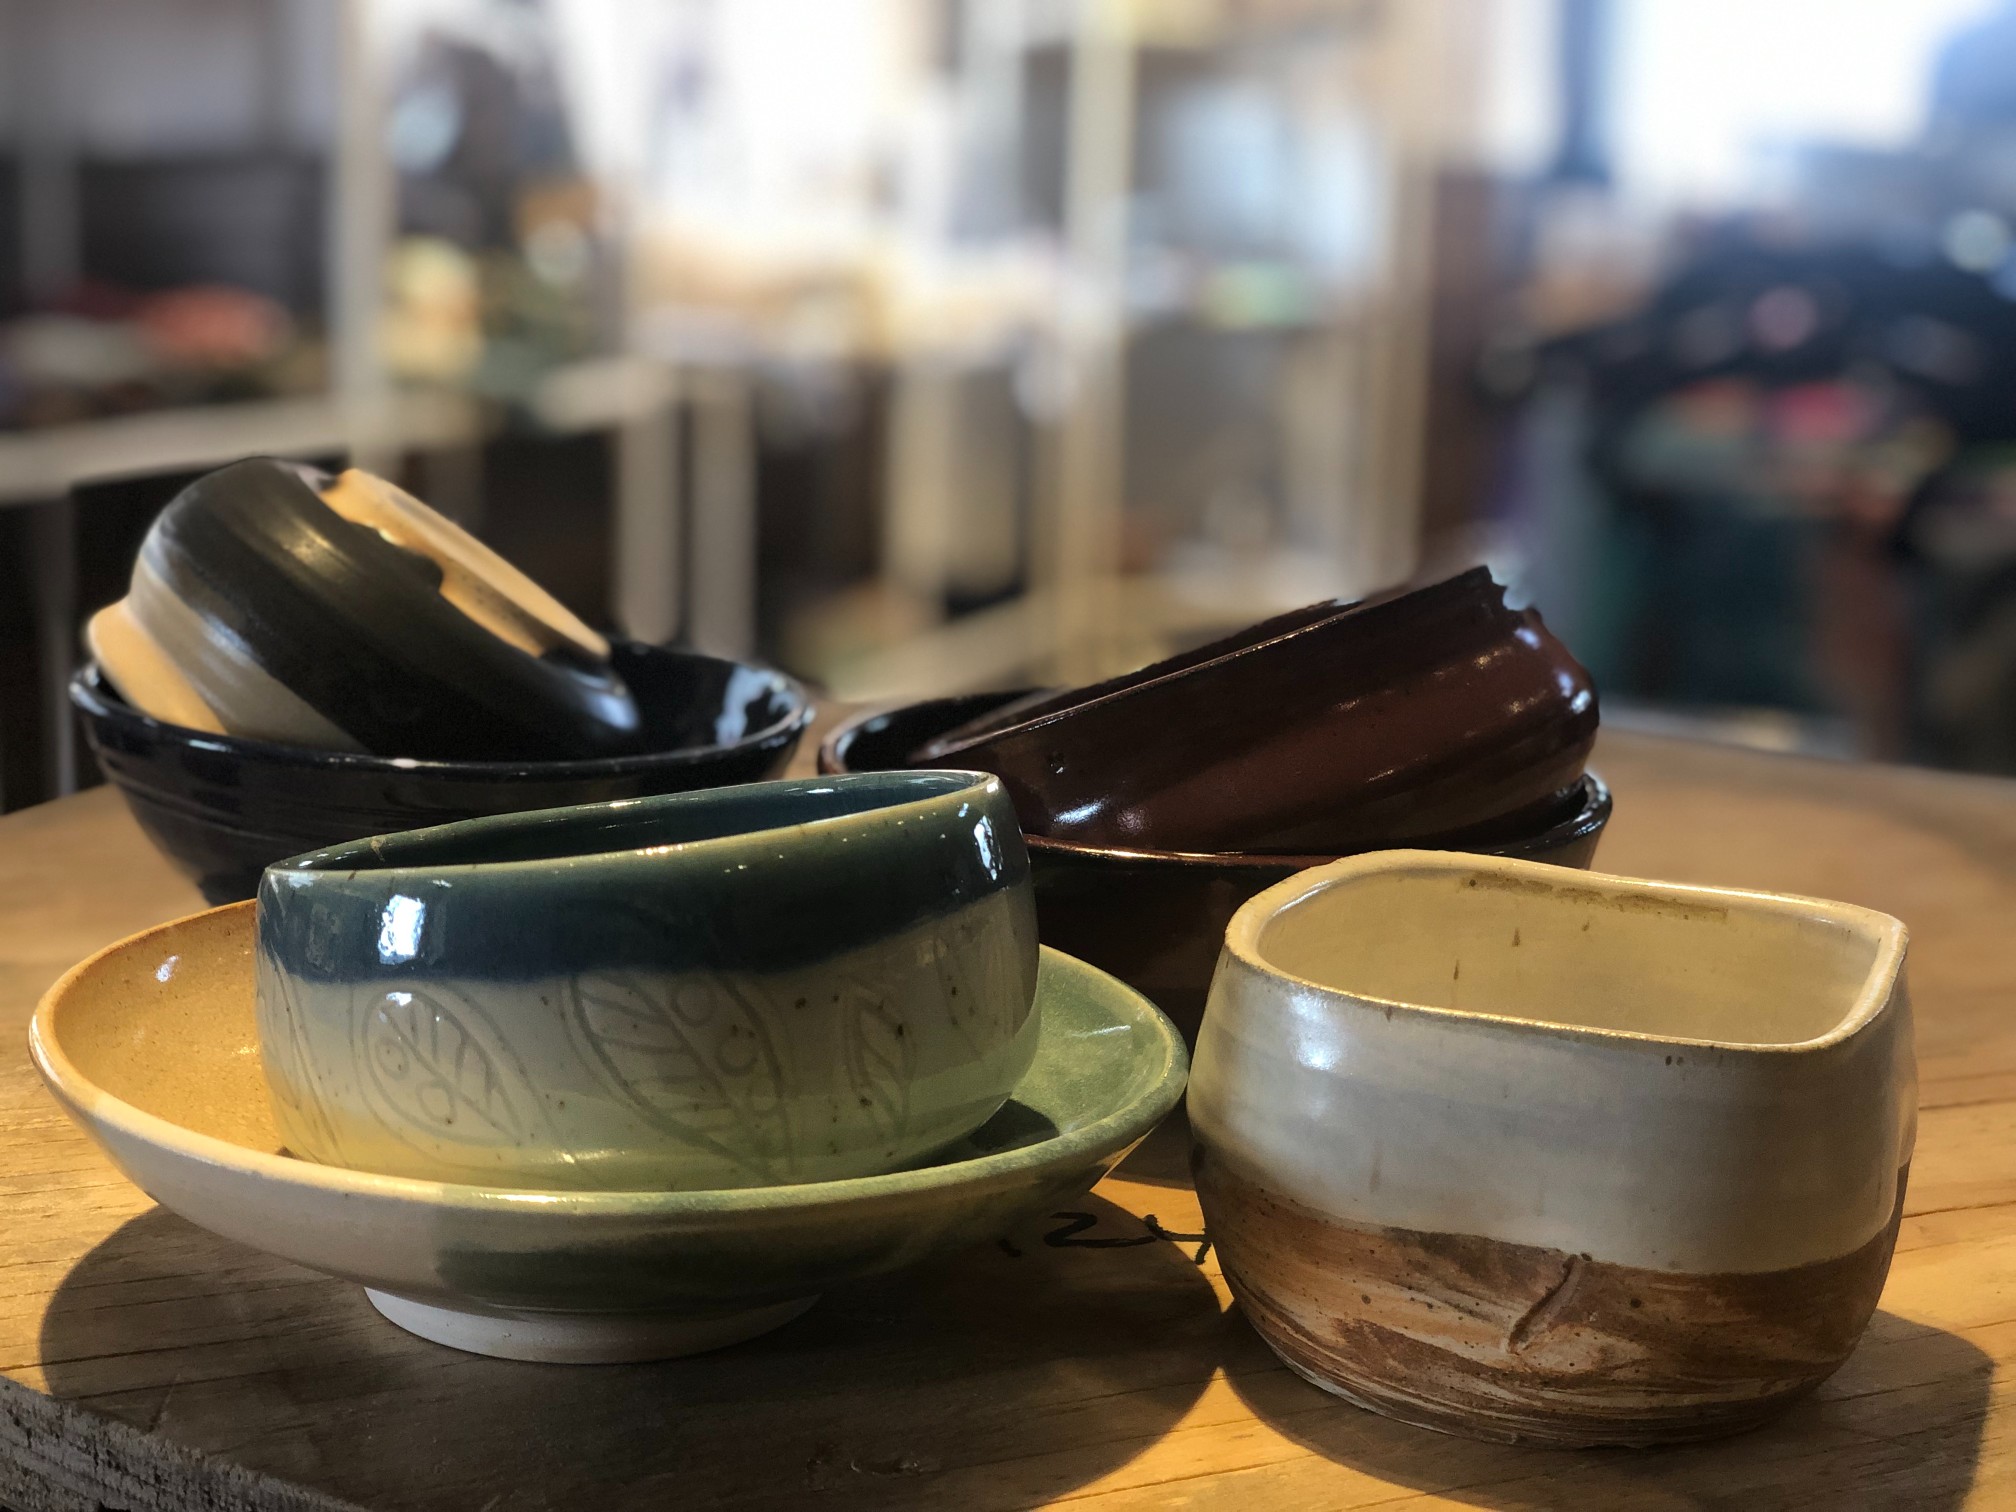 Empty bowls sit on a wooden table